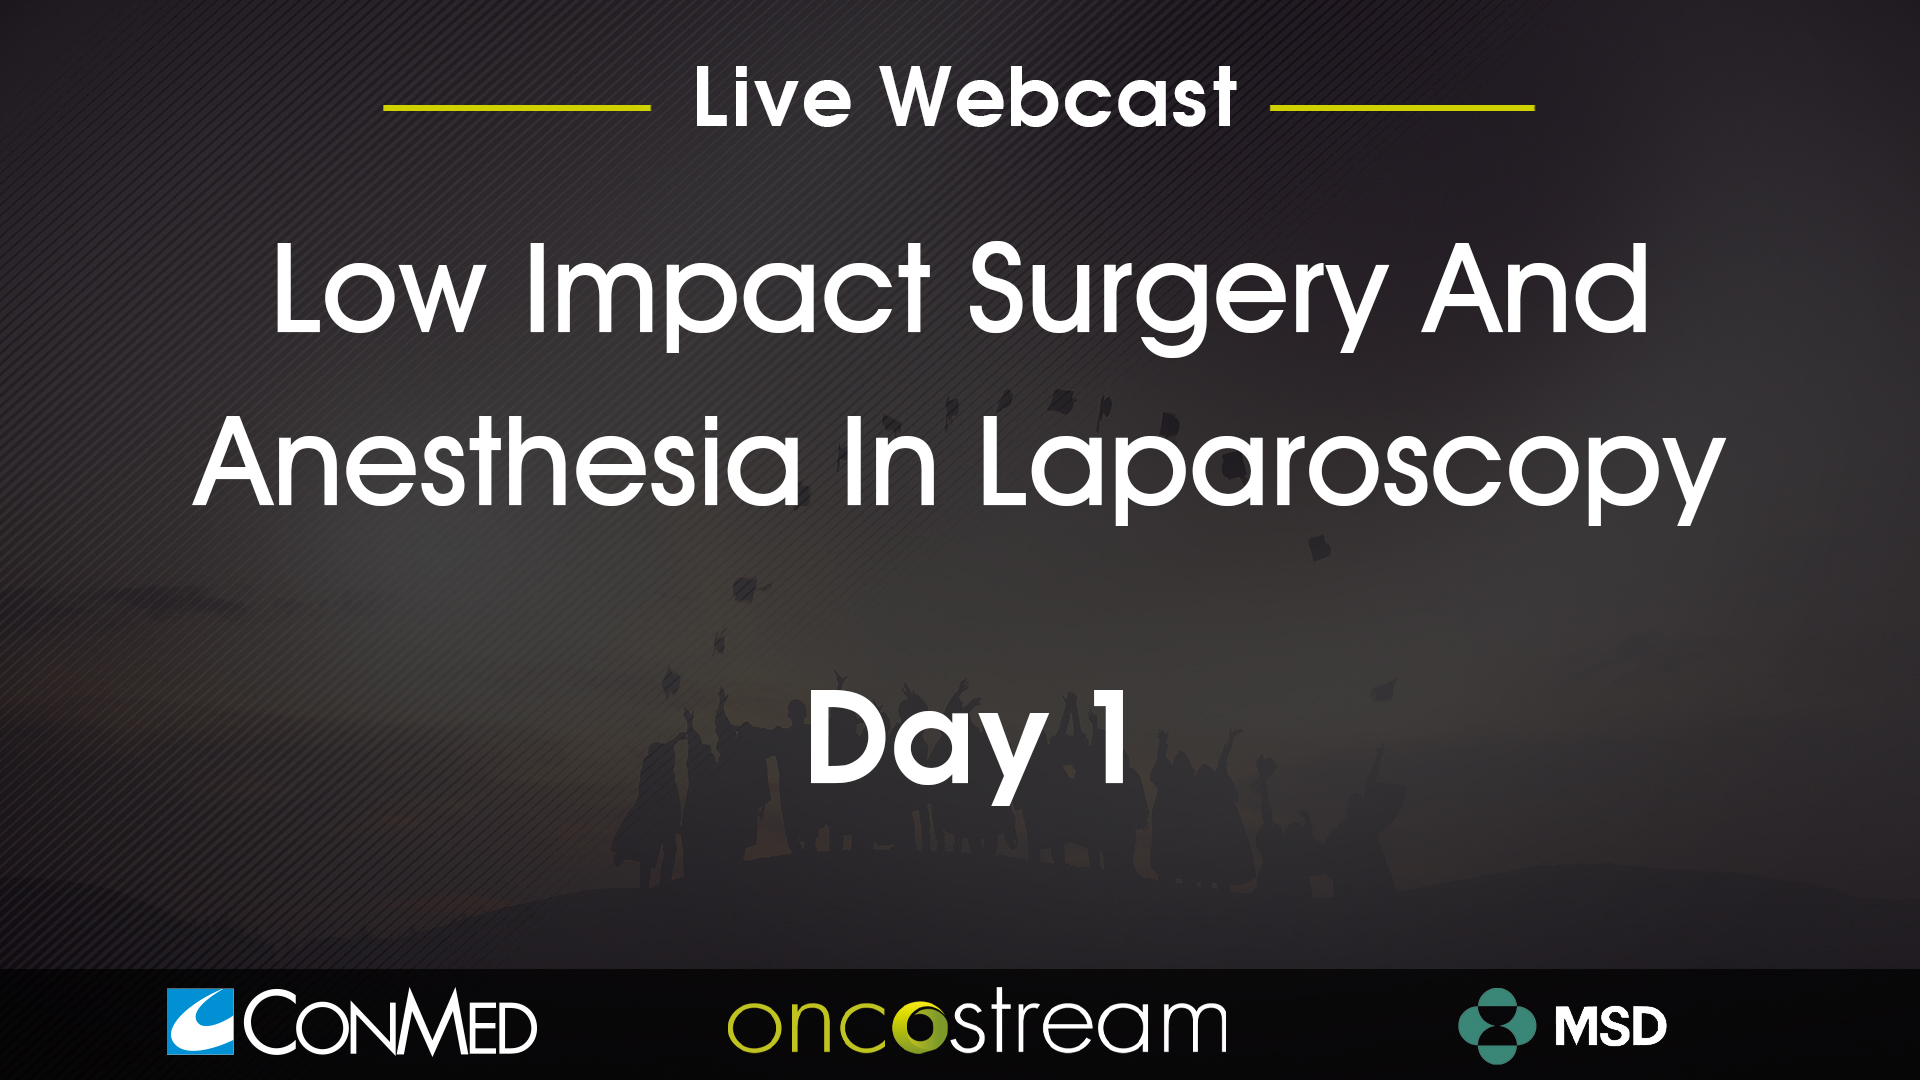 LOW IMPACT SURGERY AND ANESTHESIA IN LAPAROSCOPY